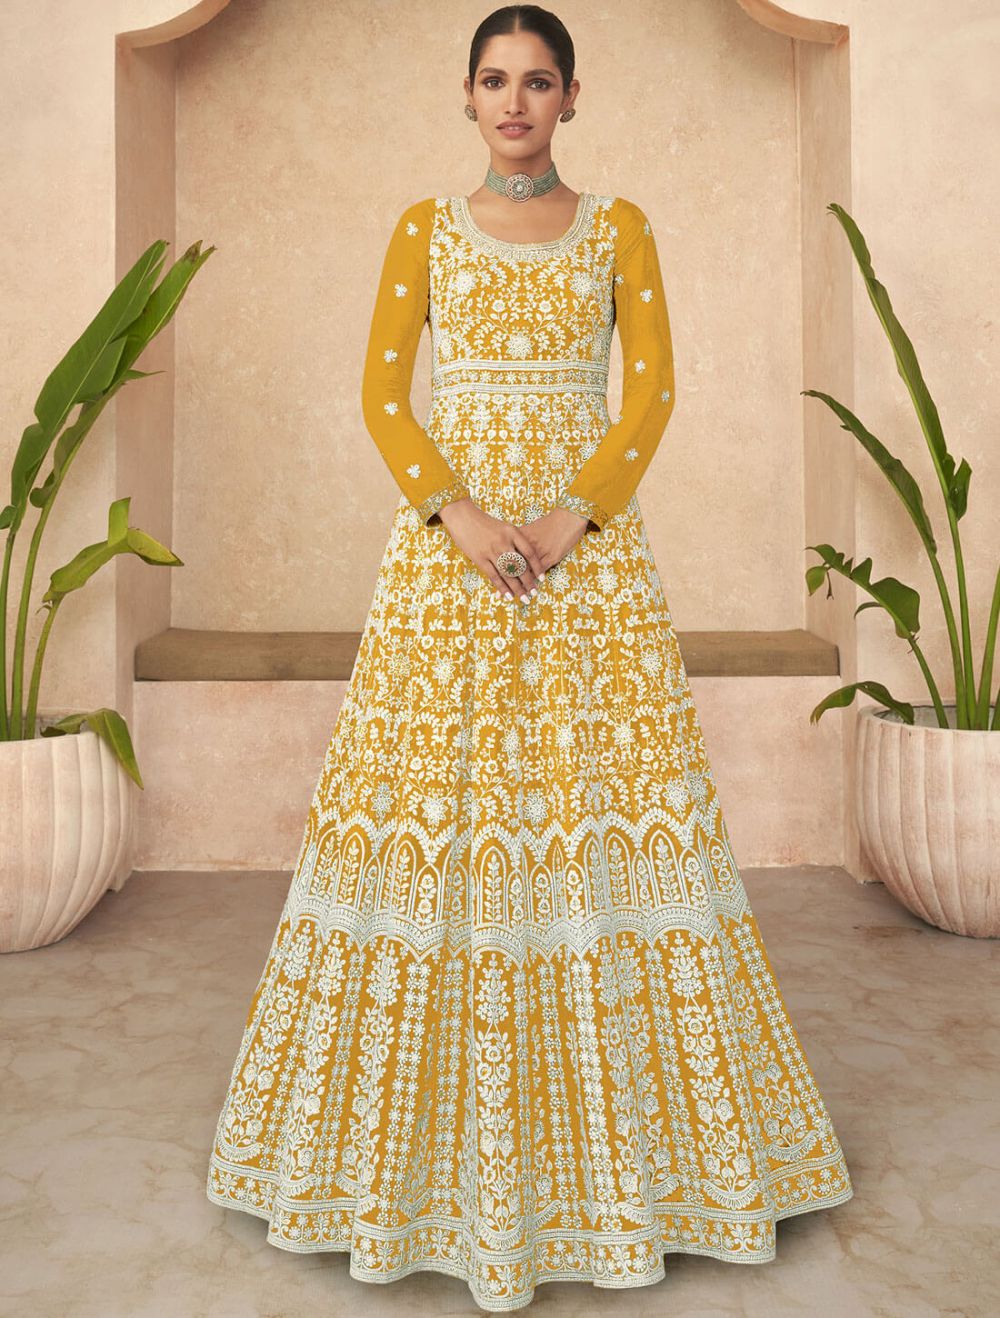 Citric yellow hand embroidered worked anarkali with dupatta Design by Ease  at Modvey | Modvey